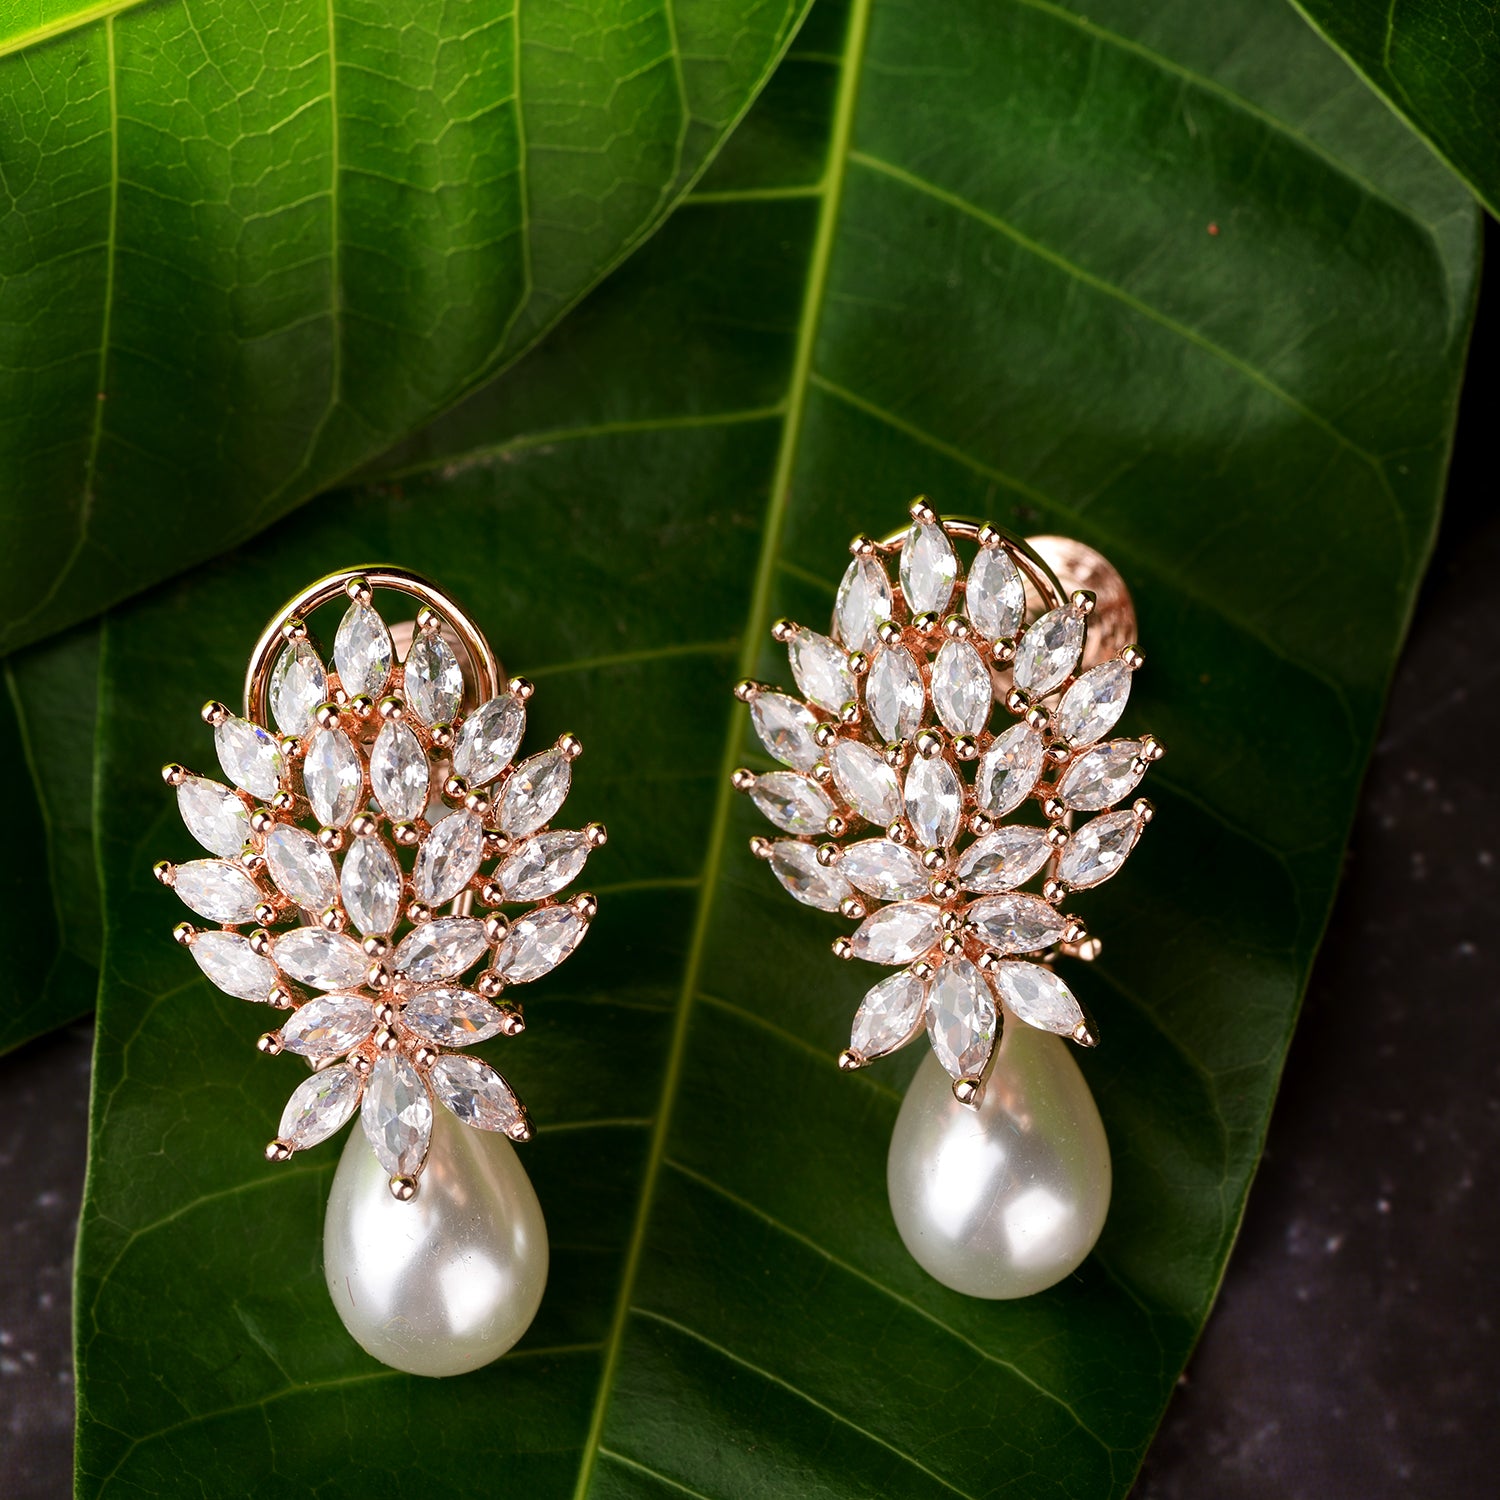 Luxurious Diamond Pearl Drop Earrings High Quality White Pearl Ad Studded for Women and Girls - Saraf RS Jewellery